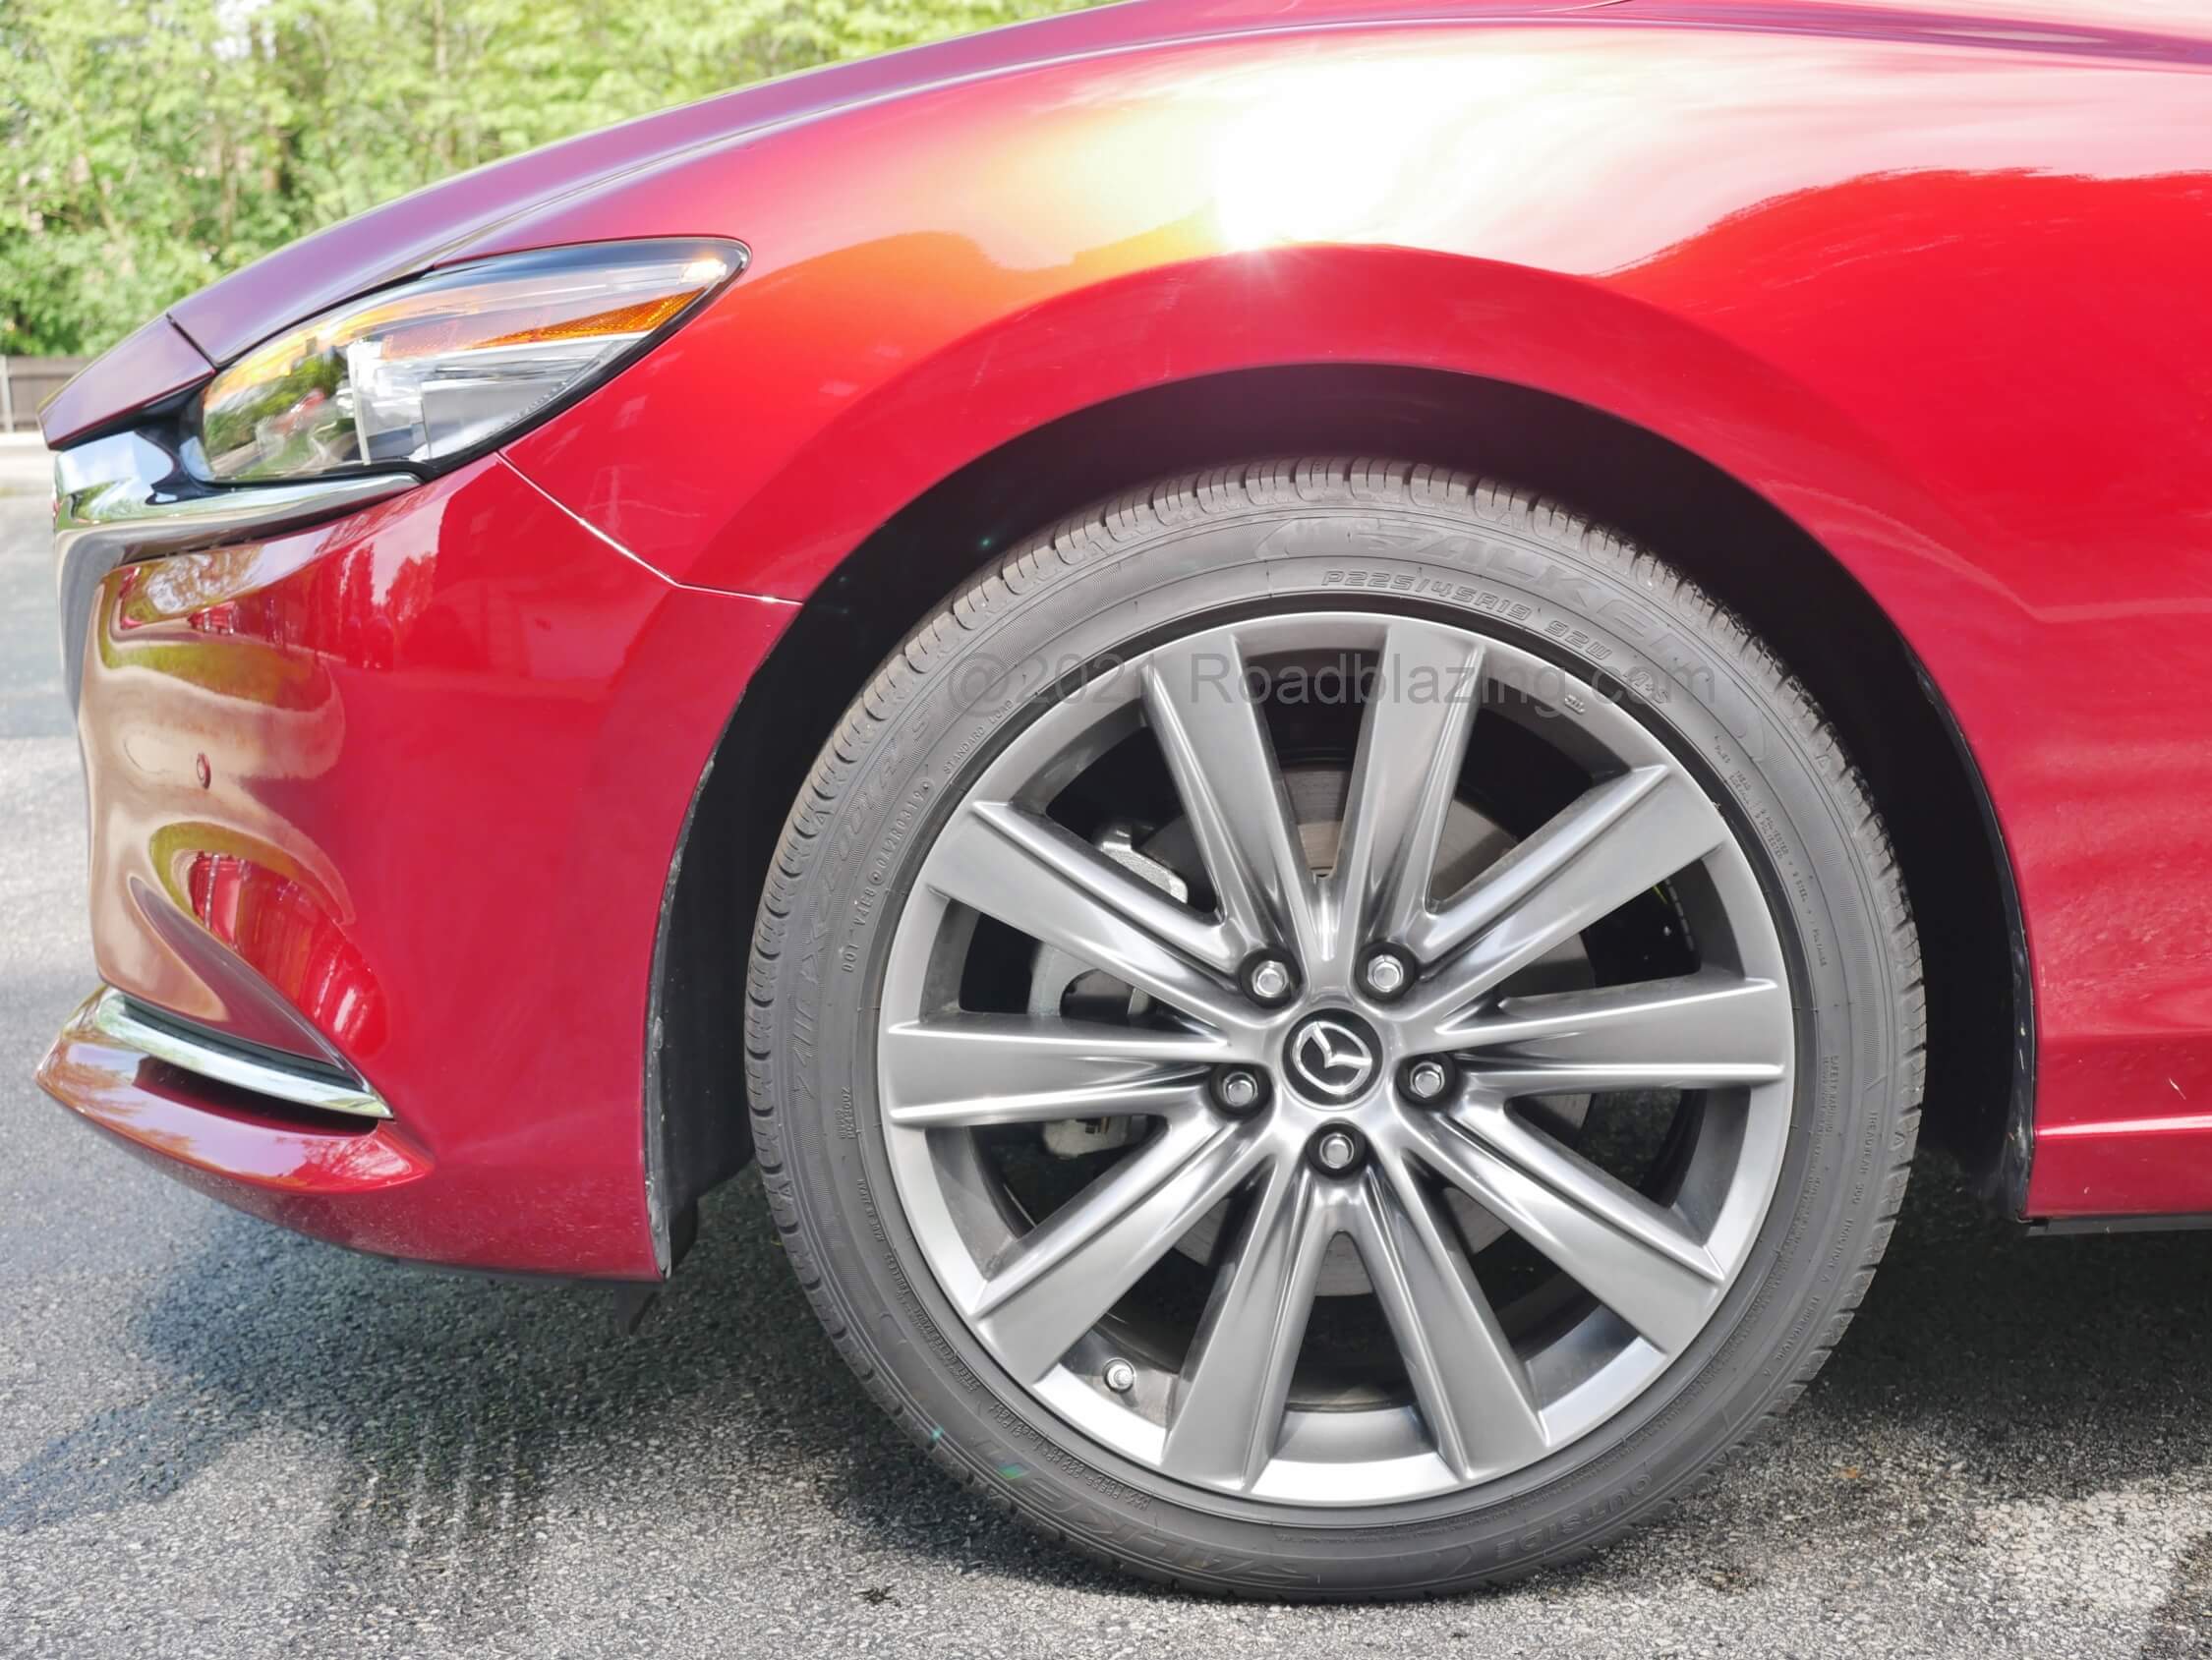 2021 Mazda 6 Signature 2.5T: Compliant sprung fully independent suspension w/ taut damping allows 19" Falken Ziex tires on alloy wheels to deliver a smooth but responsive ride.